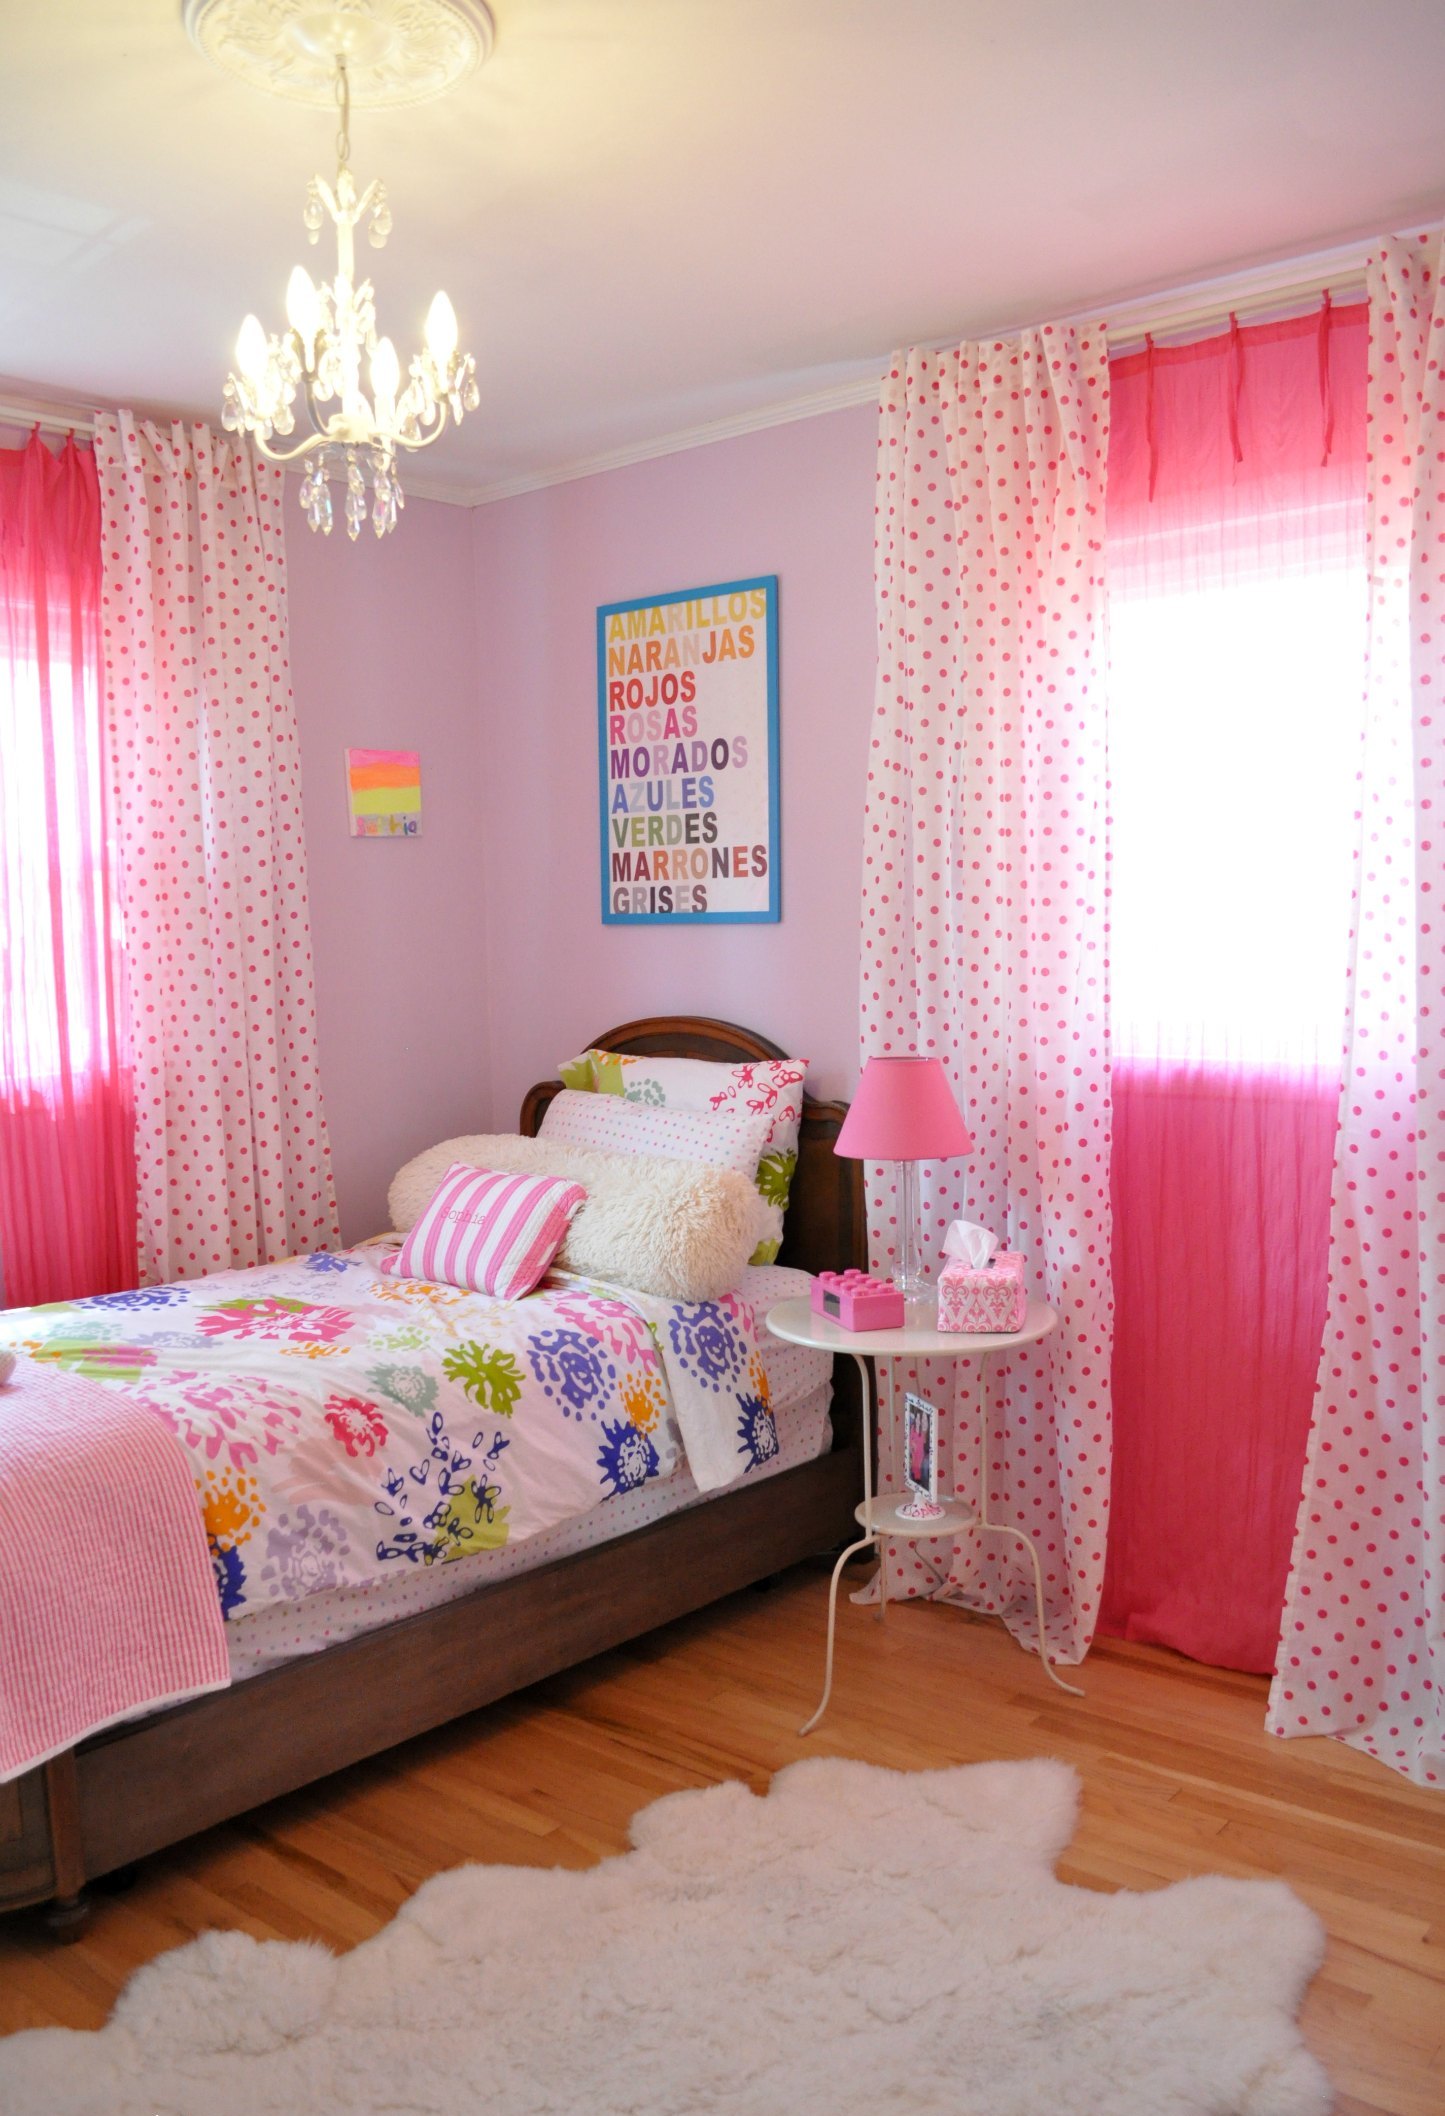  Simple Pink Bedroom With Luxury Interior